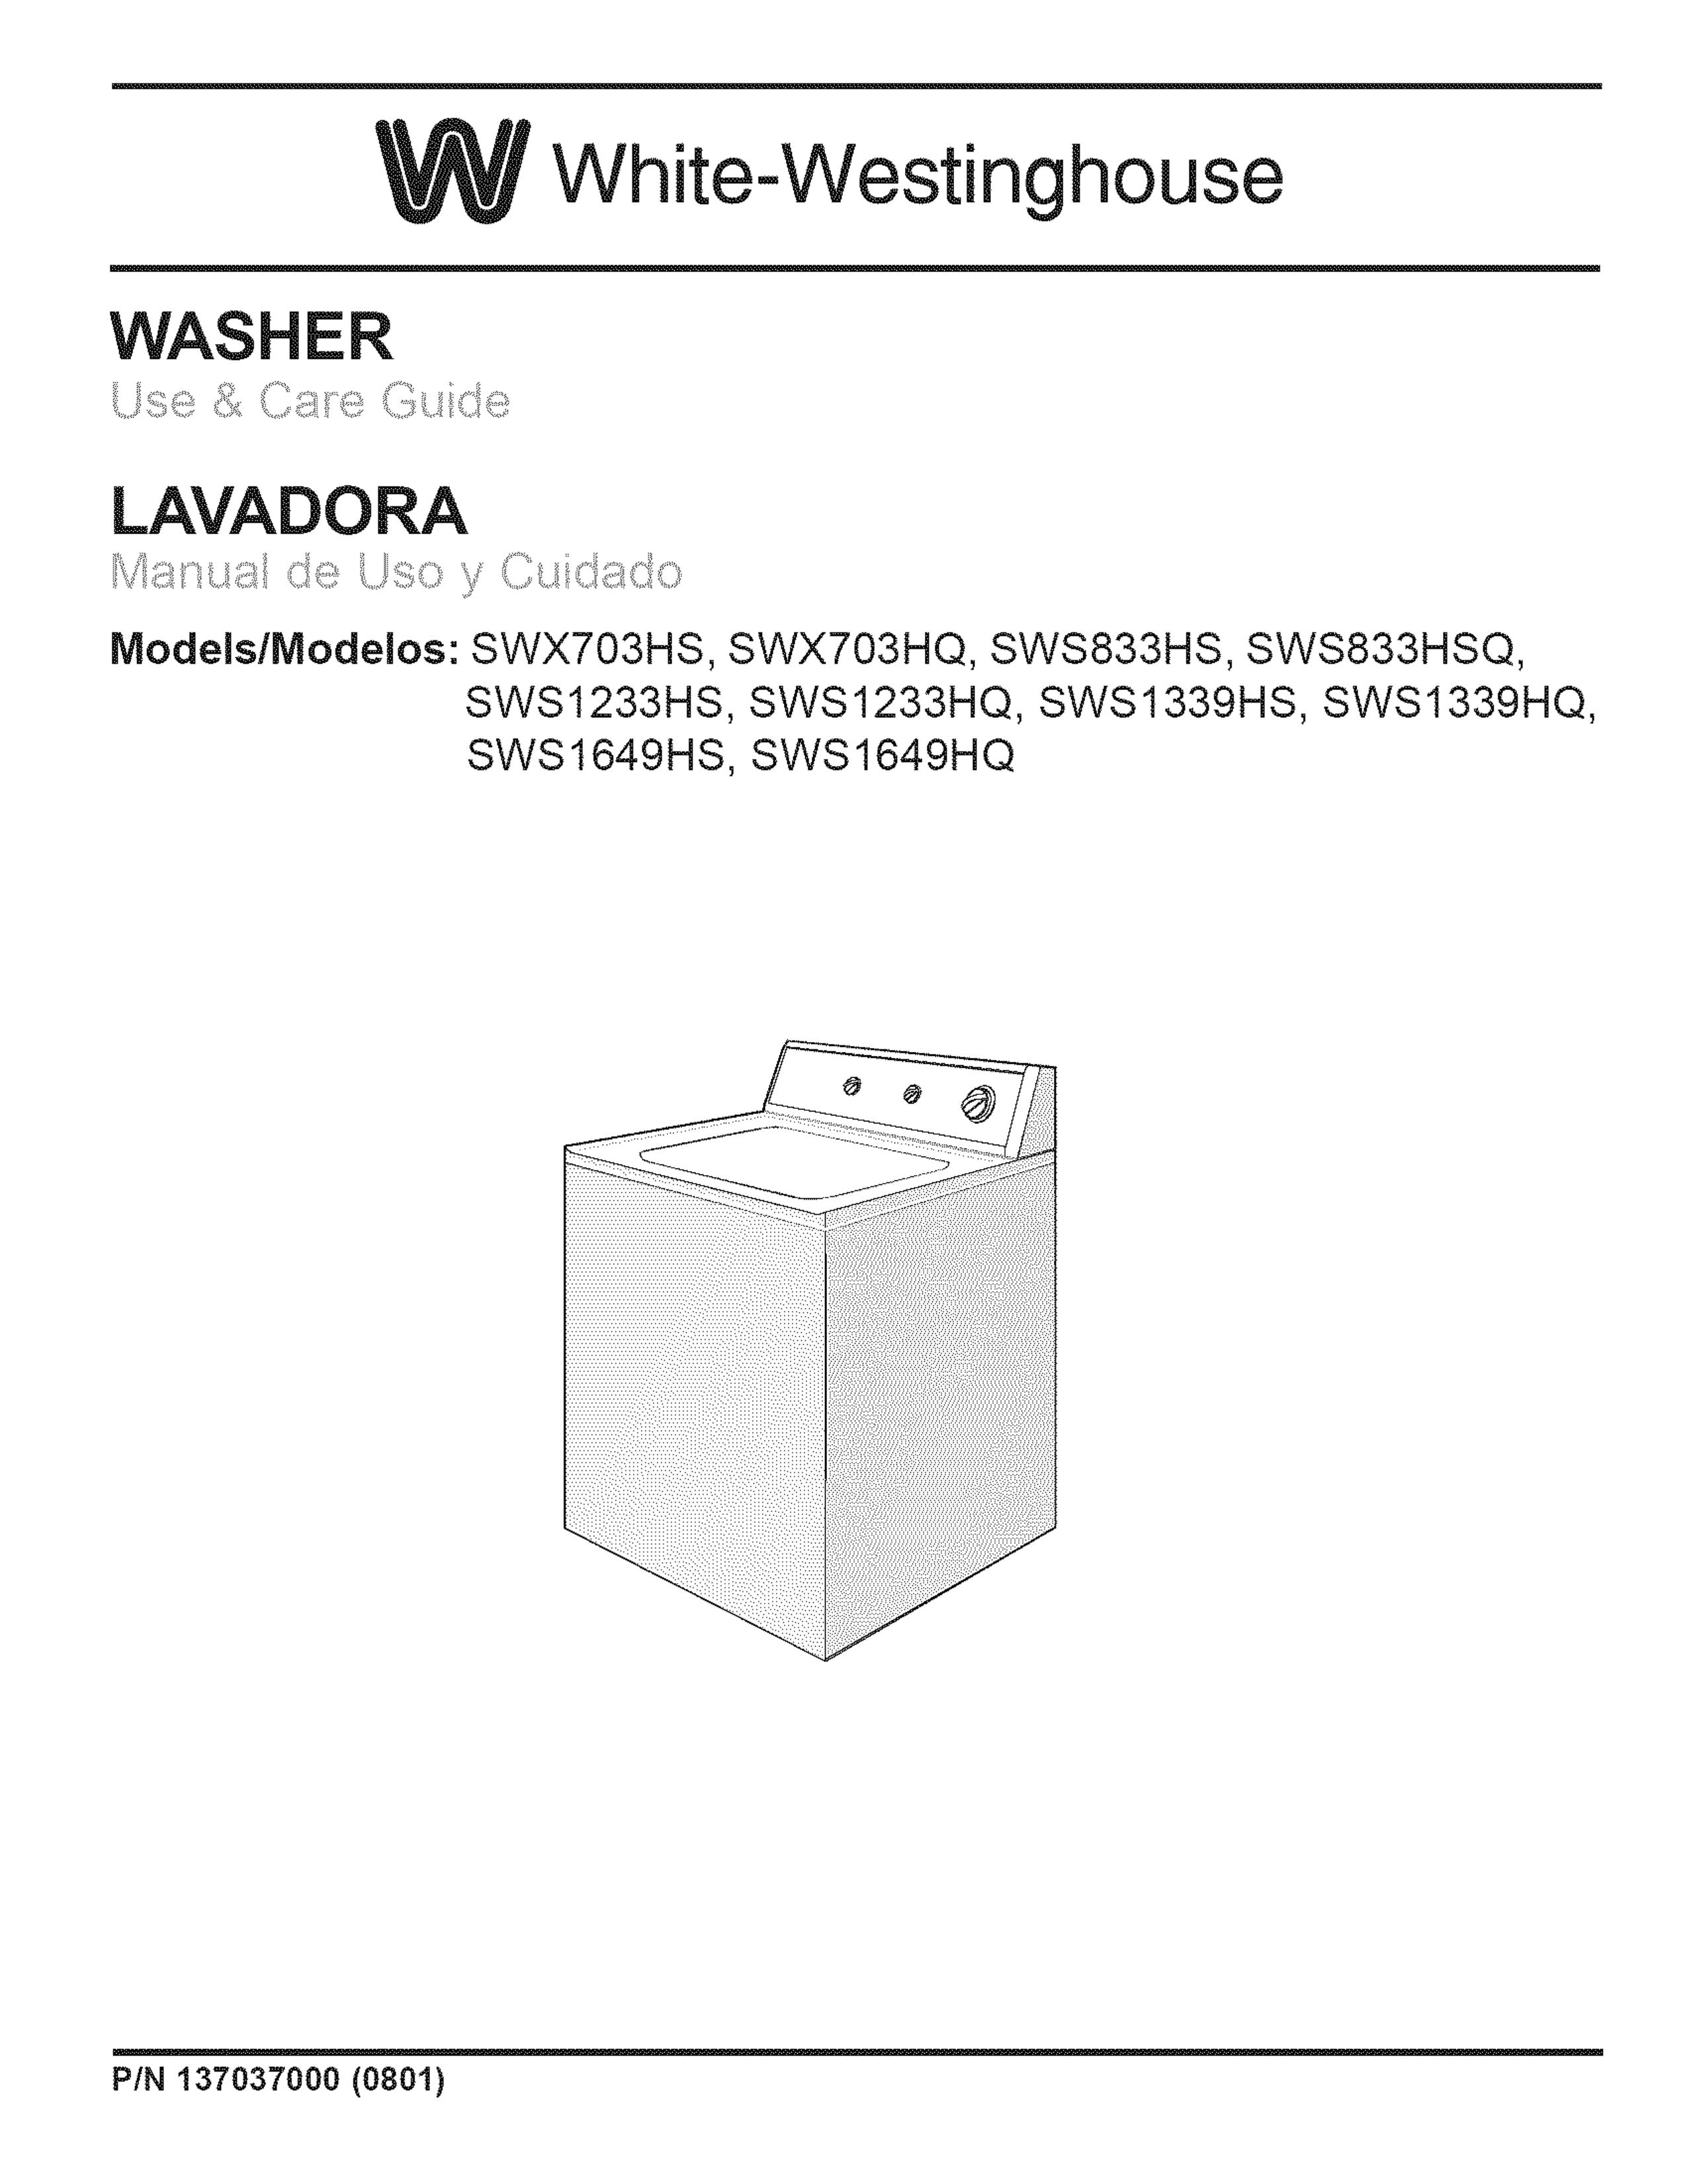 White-Westinghouse SWX703HQ Washer User Manual